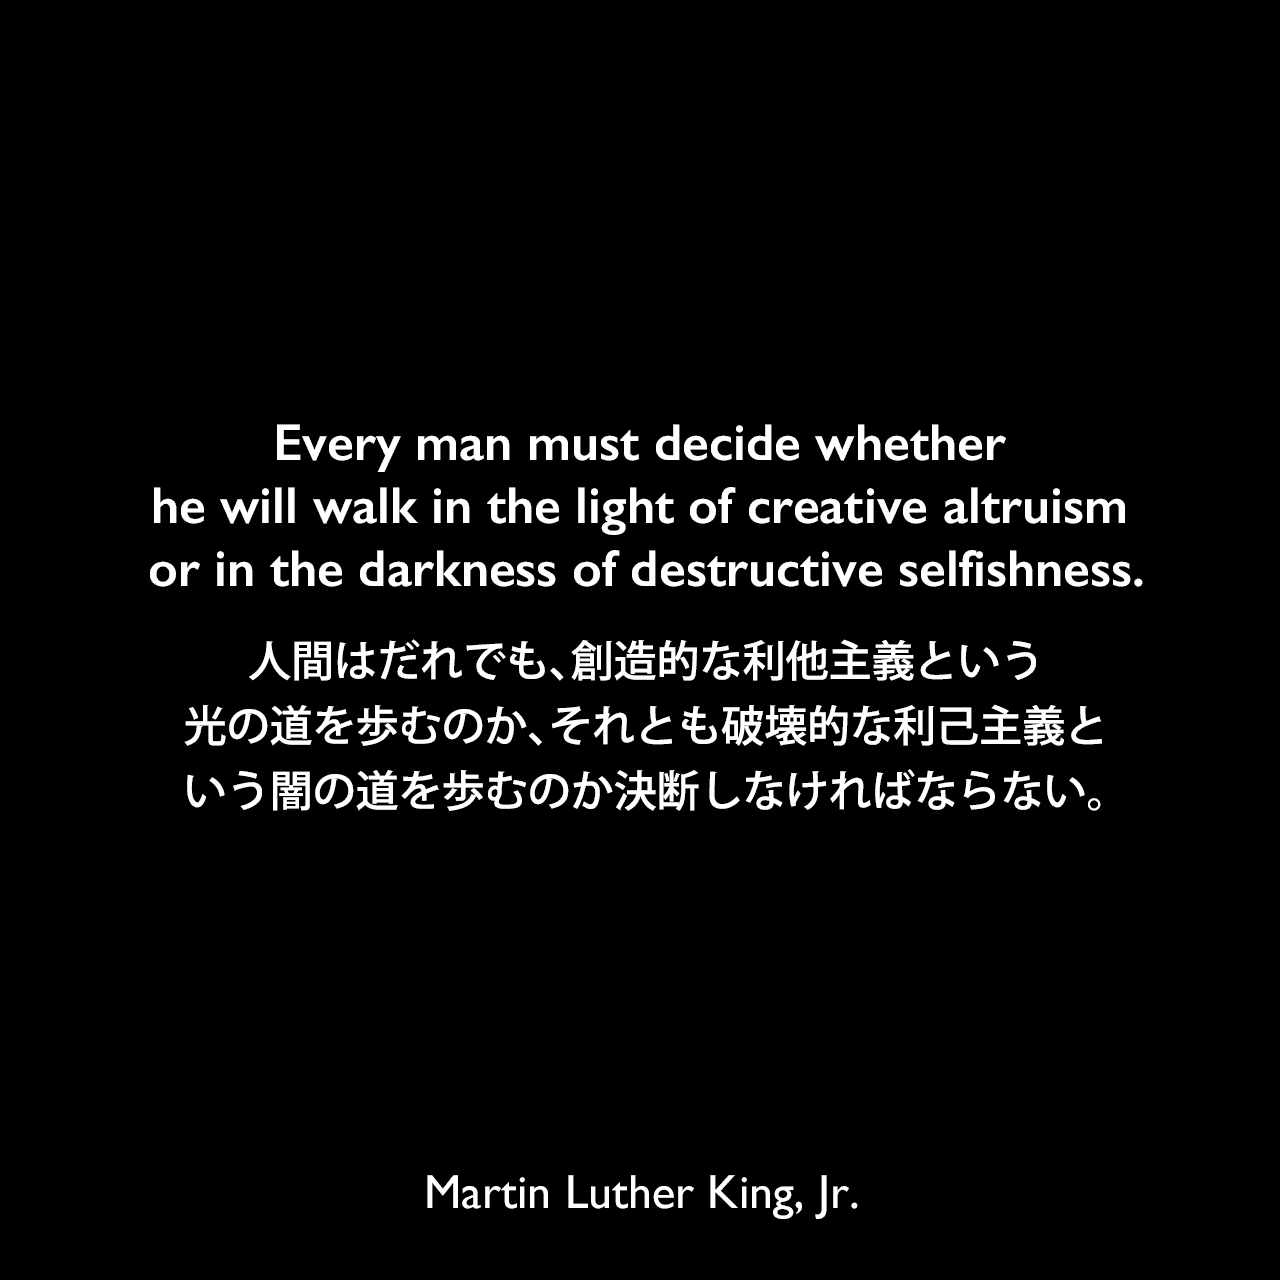 Every man must decide whether he will walk in the light of creative altruism or in the darkness of destructive selfishness.人間はだれでも、創造的な利他主義という光の道を歩むのか、それとも破壊的な利己主義という闇の道を歩むのか決断しなければならない。- 1957年の説教「Conquering Self-centeredness」よりMartin Luther King, Jr.